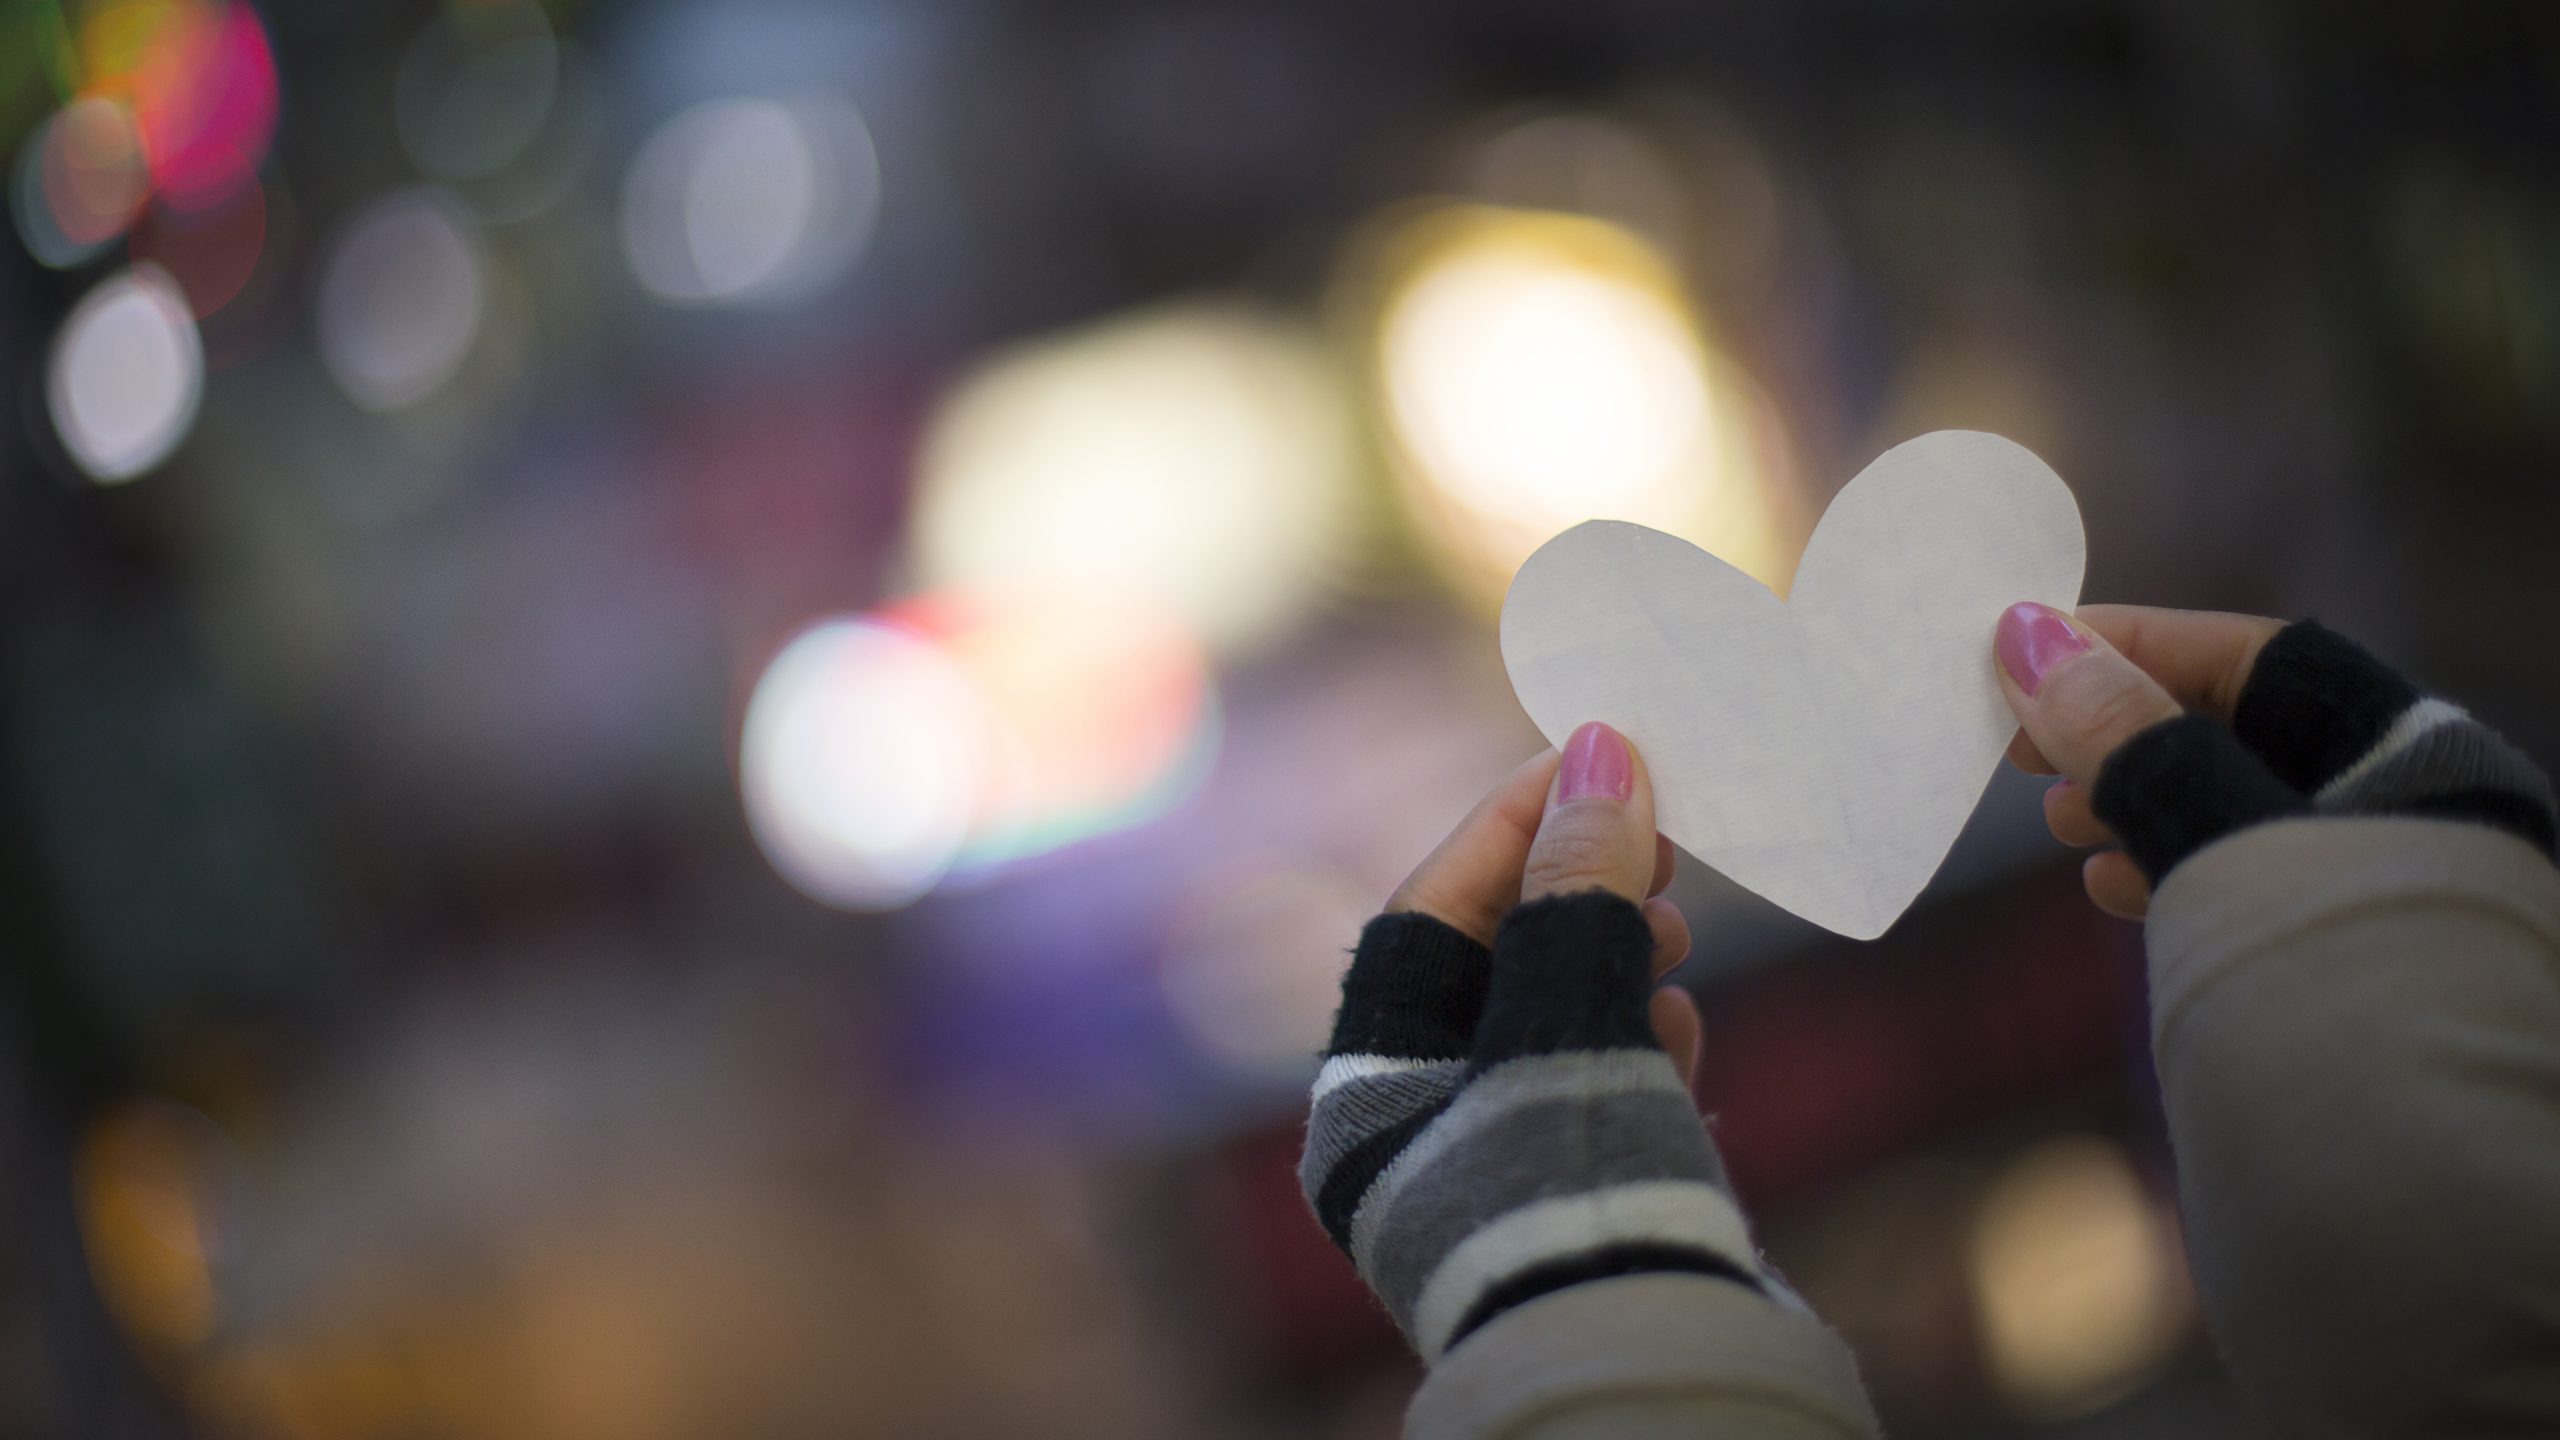 Hands holding a paper heart, blurred background. Photography for a corporate report. Photographer Tuomas Harjumaaskola.